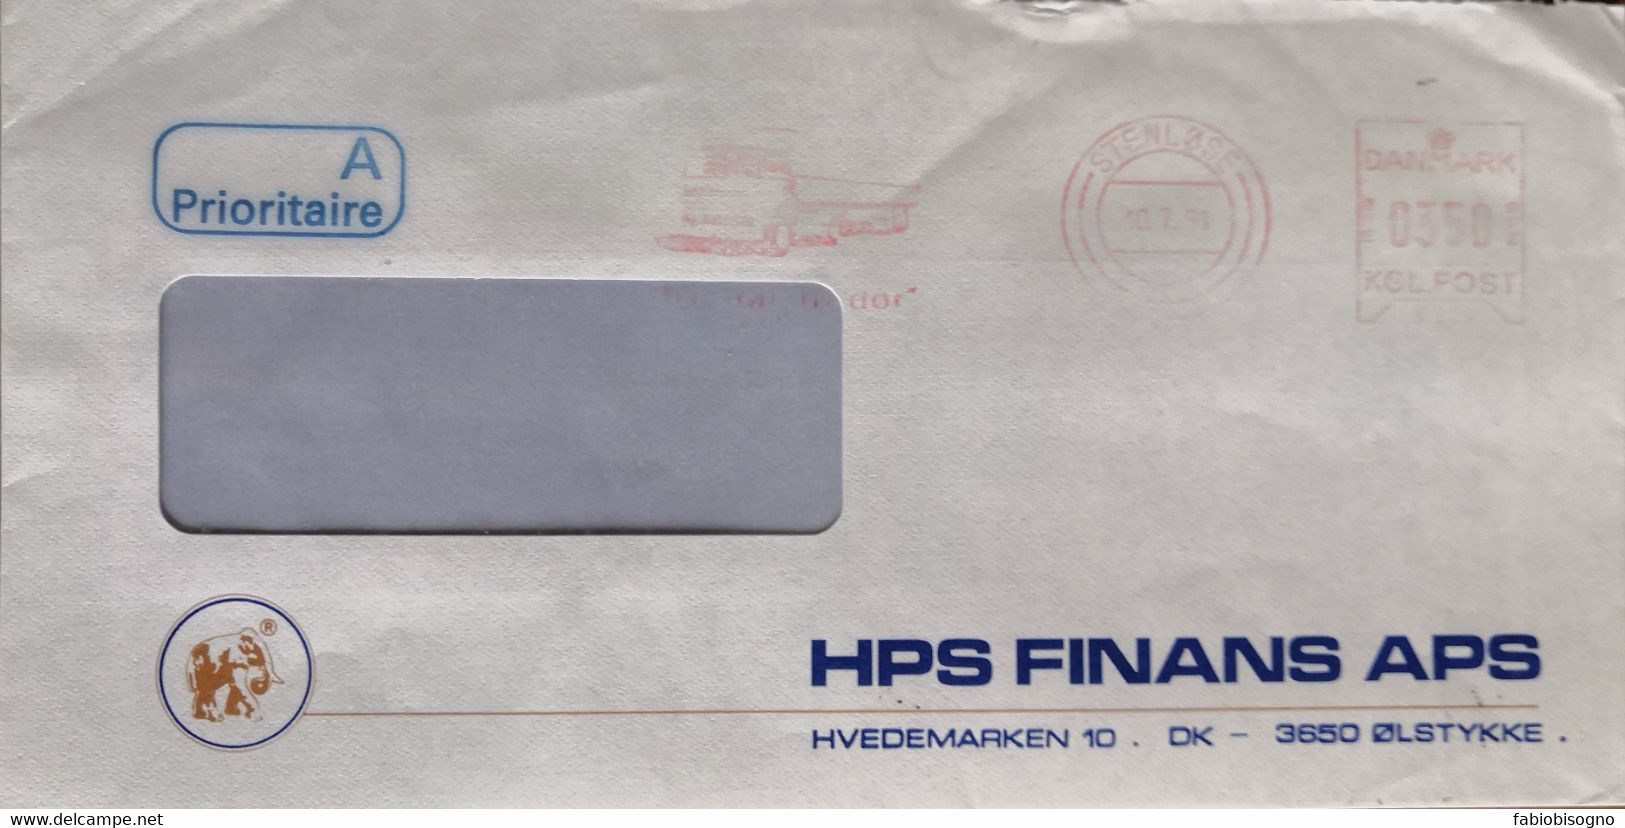 Stenlosew 1991 - Hps Finans - Ema Meter Freistempel 17.00 - Used A Proritaire Cover To Italy - Máquinas Franqueo (EMA)